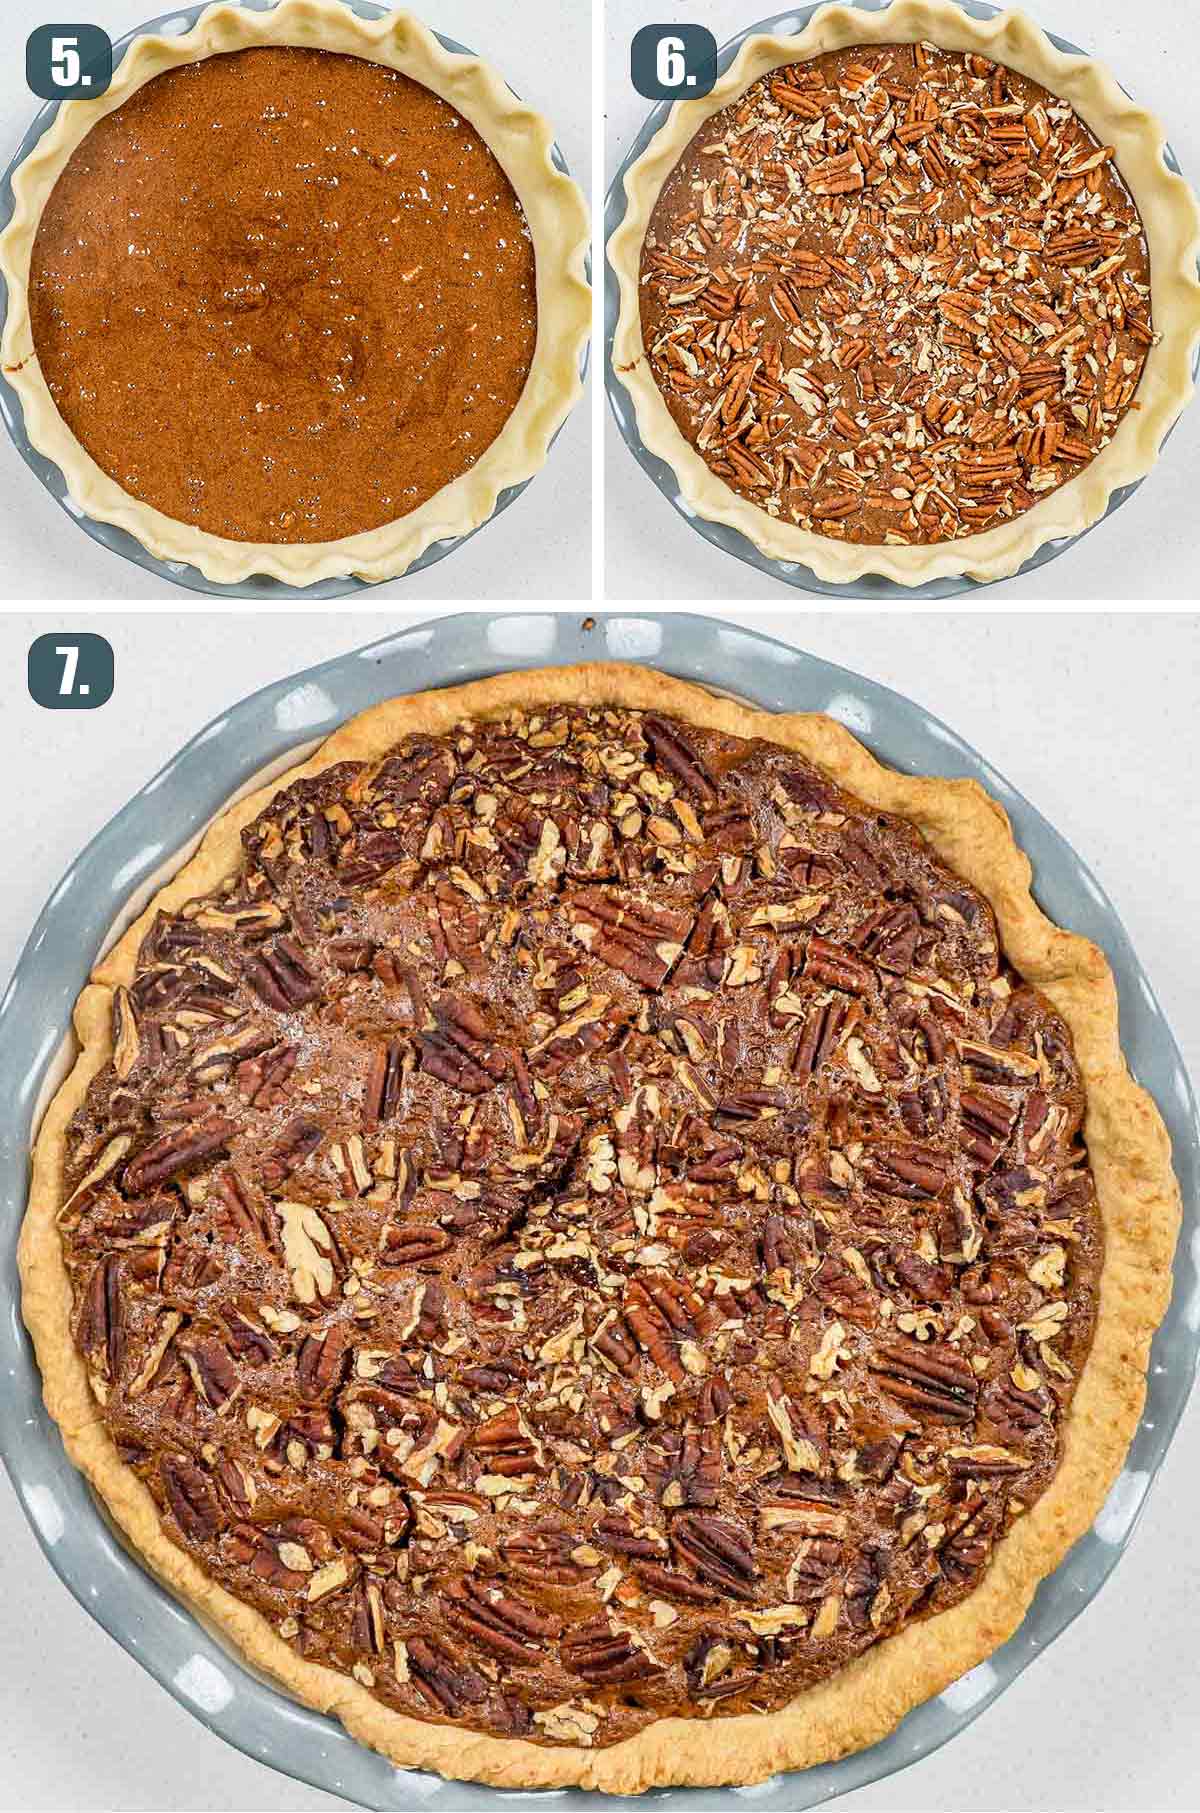 process shots showing how to bake chocolate pecan pie.